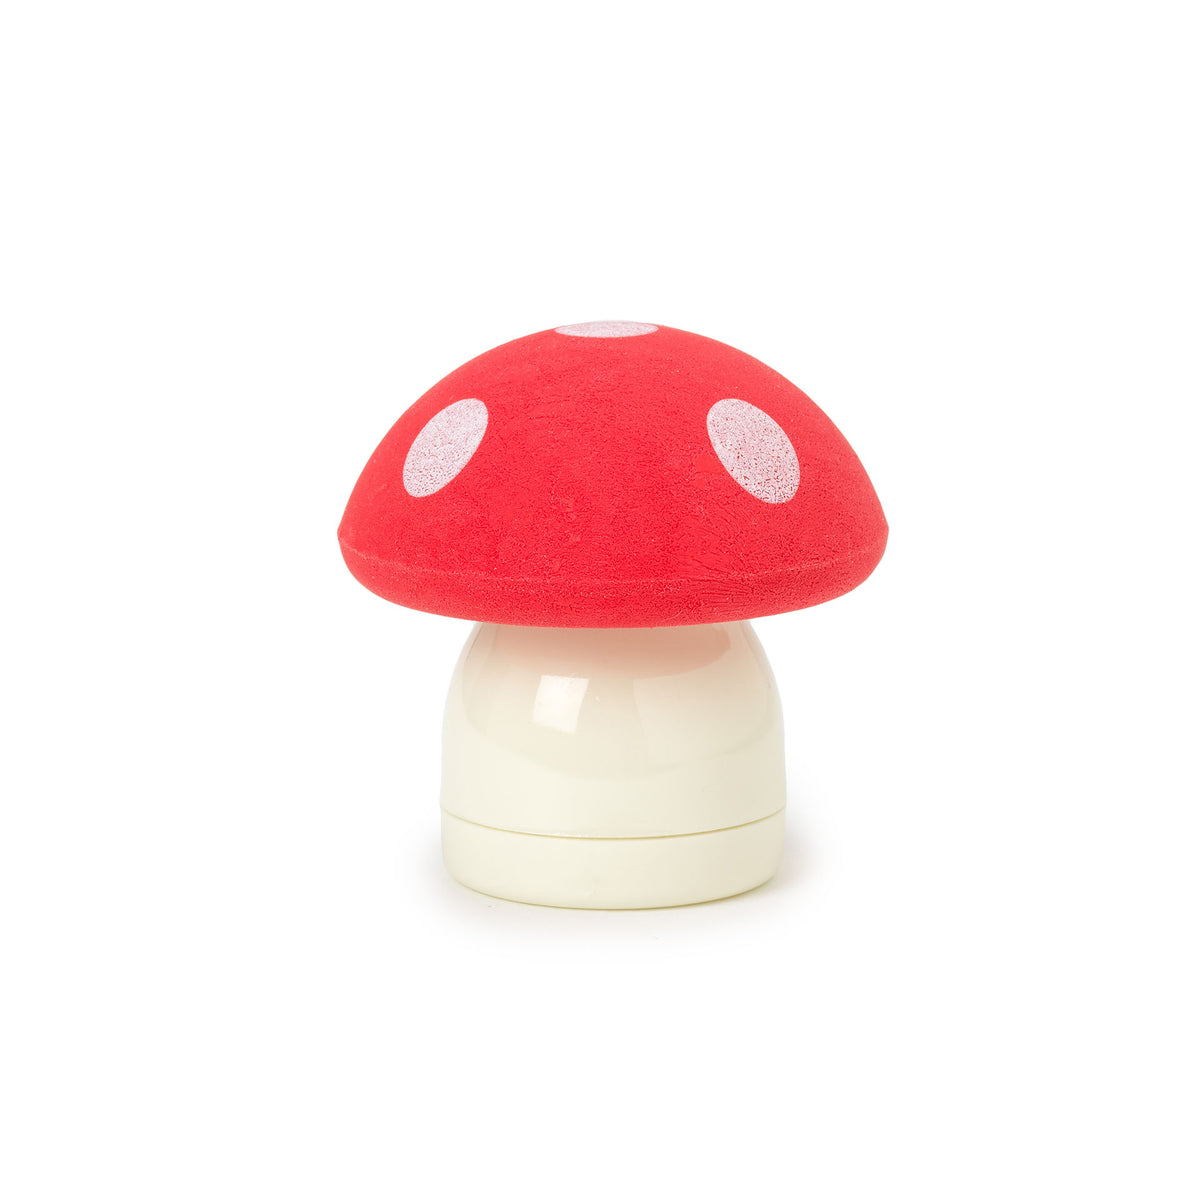 A toadstool eraser/sharpener in one. It has a cream colour stalk and a red and white spotted top.